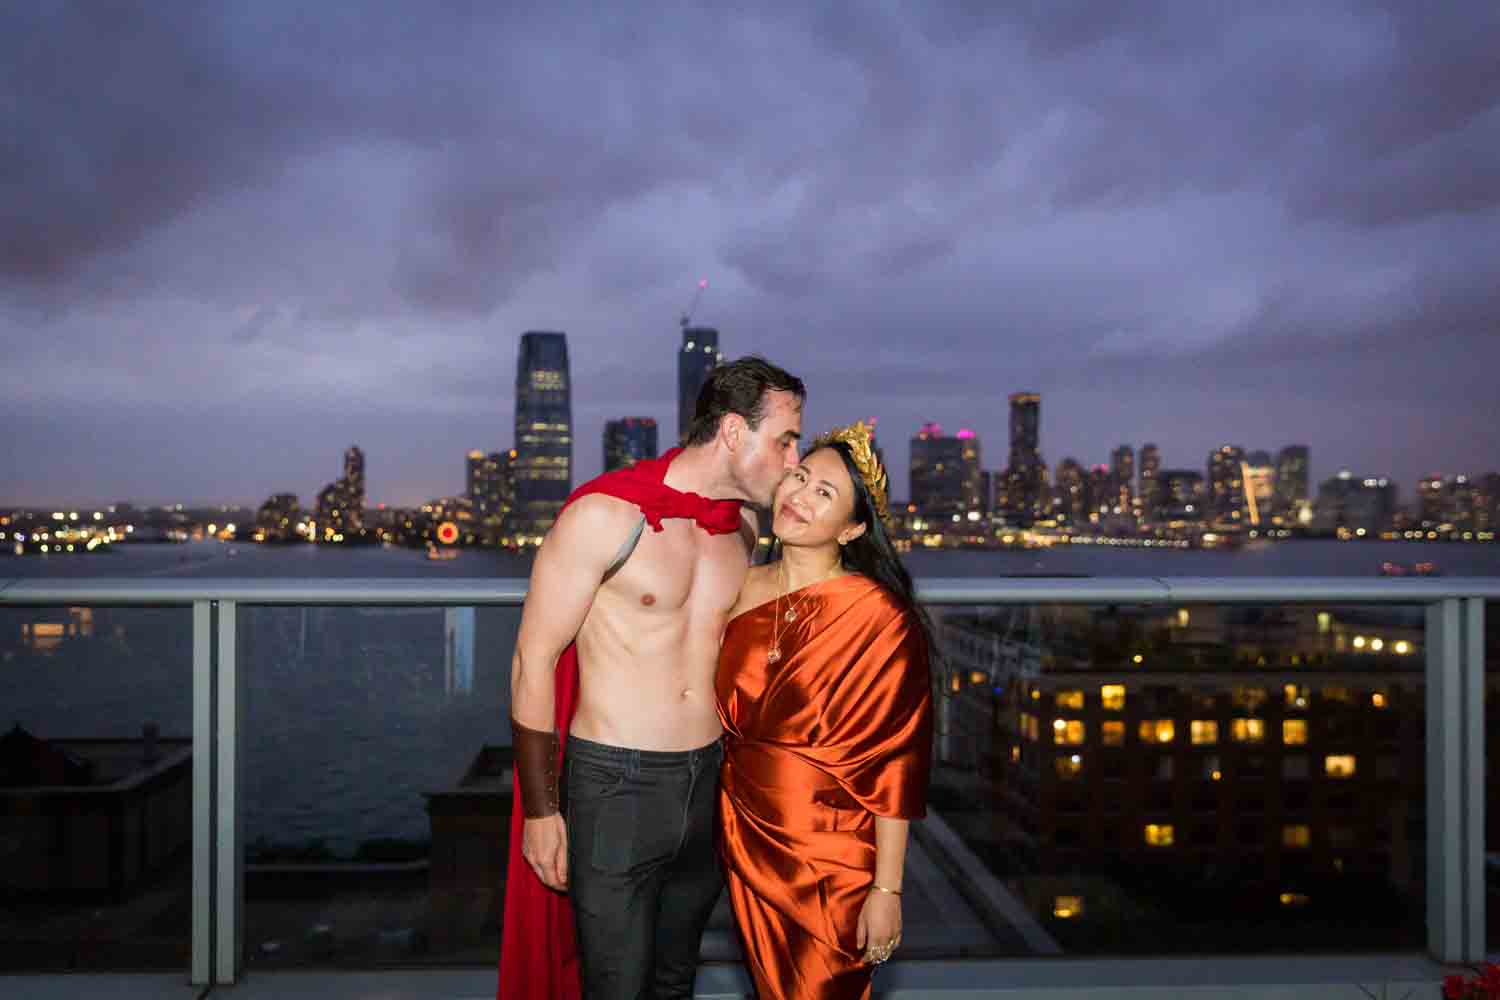 Man kissing woman at night wearing Roman outfit with NYC skyline in background